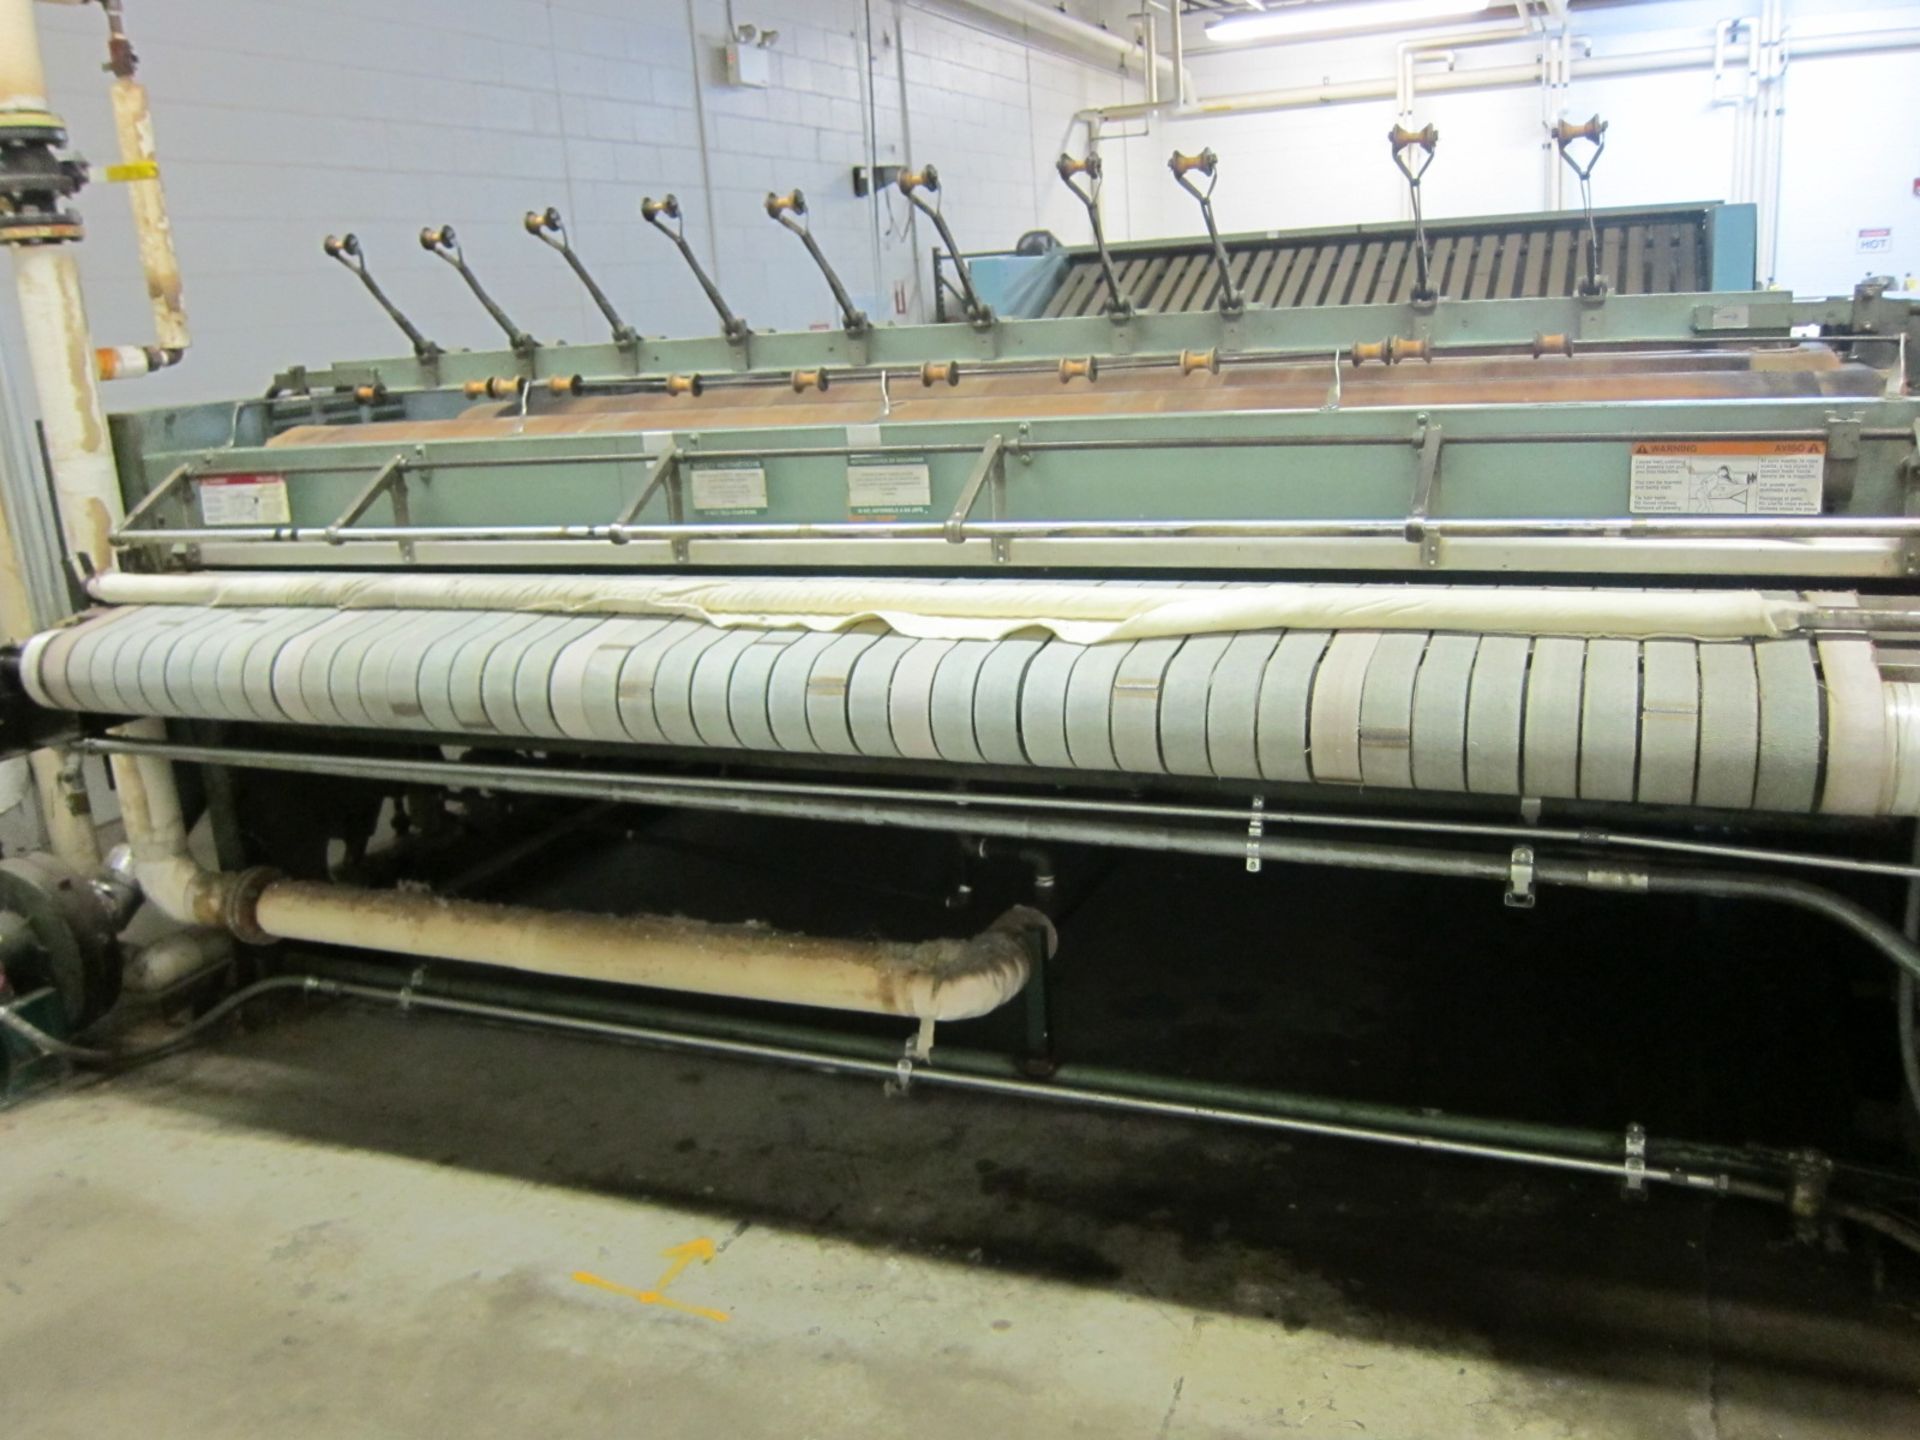 HYPRO 6 ROLL FLATWORK IRONER AMERICAN Model: 6 ROLL S/N: 141-M3-281 - Image 2 of 5